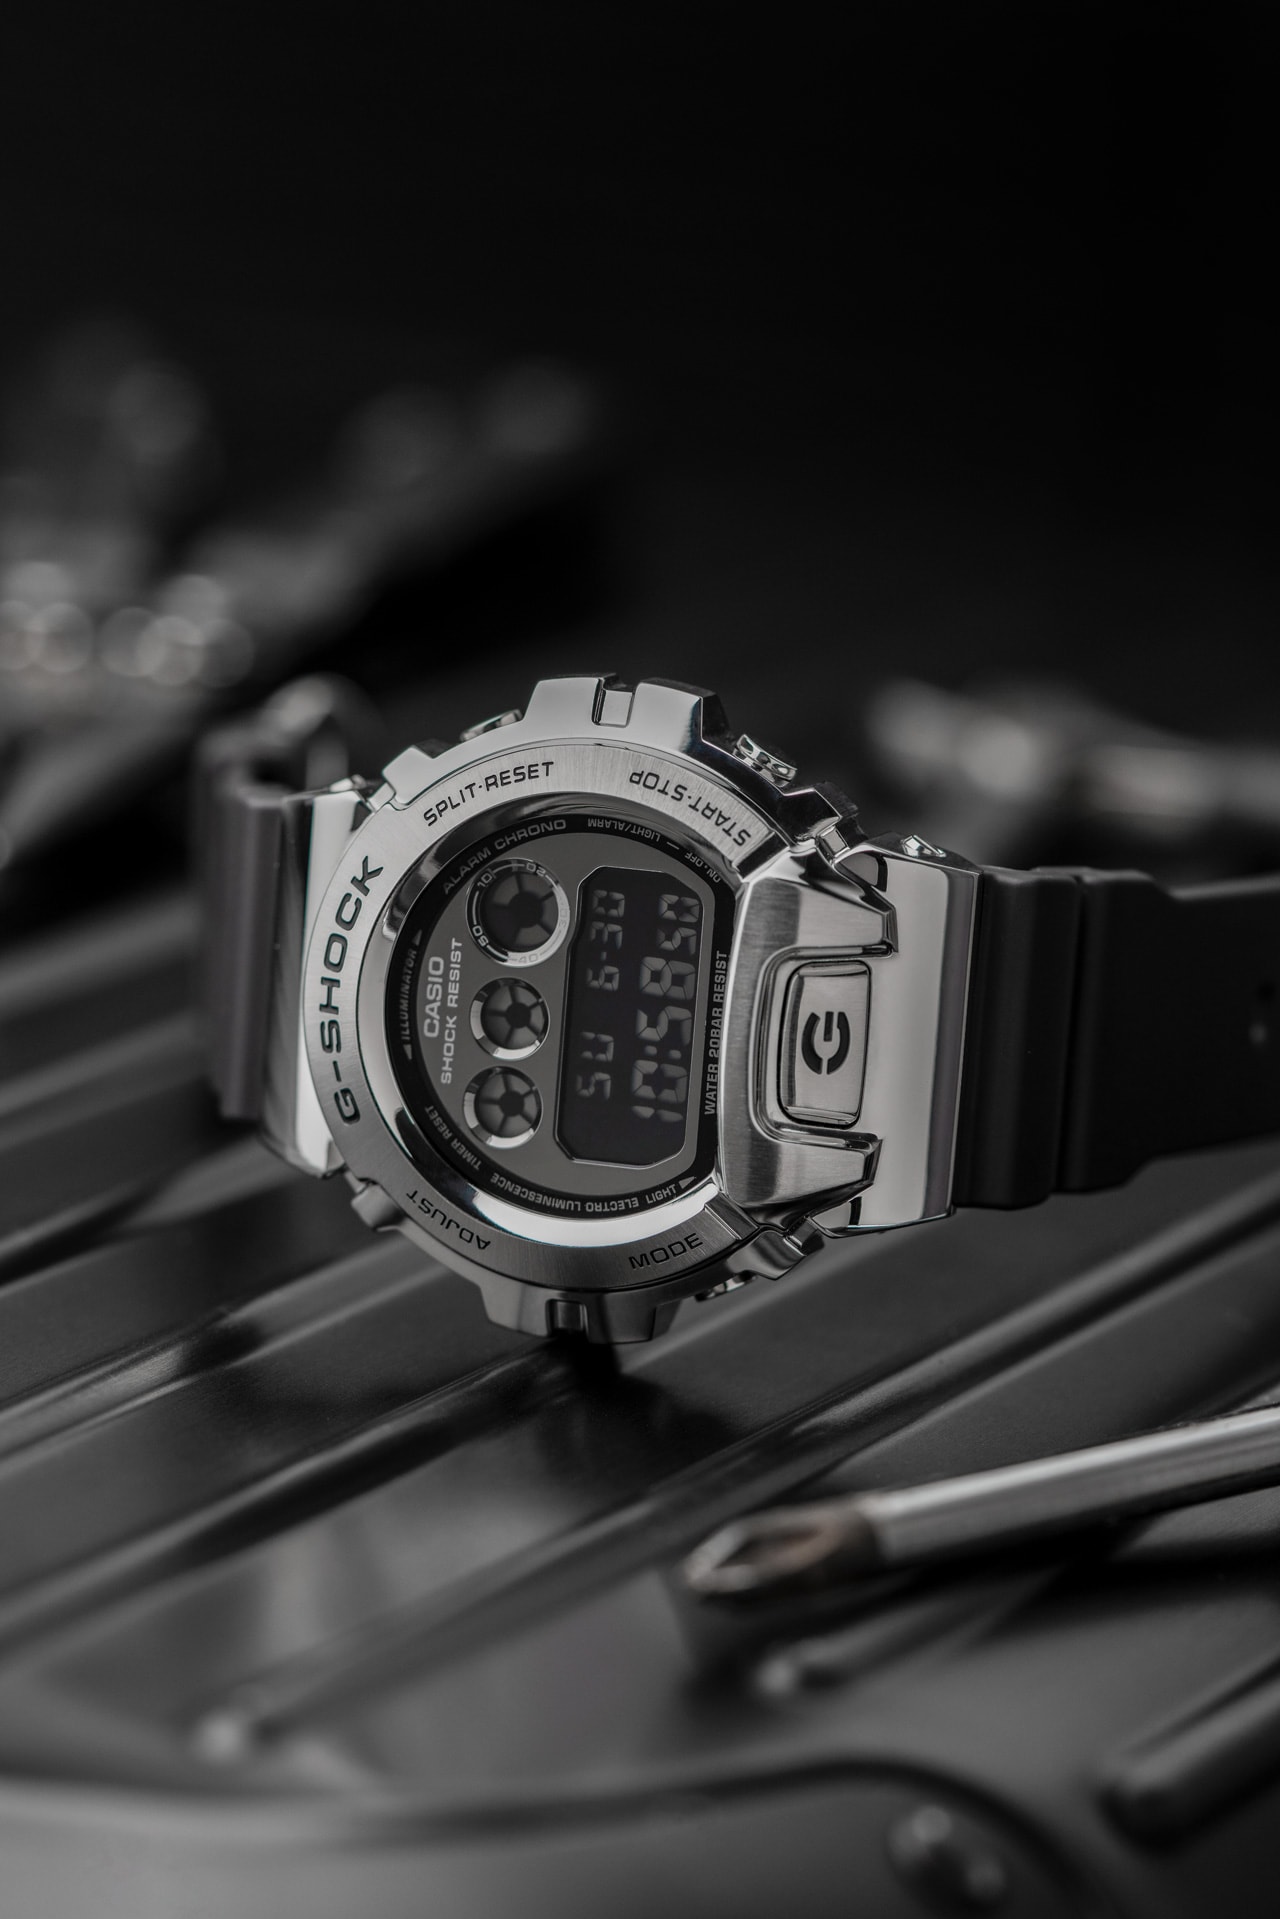 G-SHOCK GM-6900 series "Future Legends" Campaign Style Makers Groovers silver gold red watch timepiece 90s metal bezel